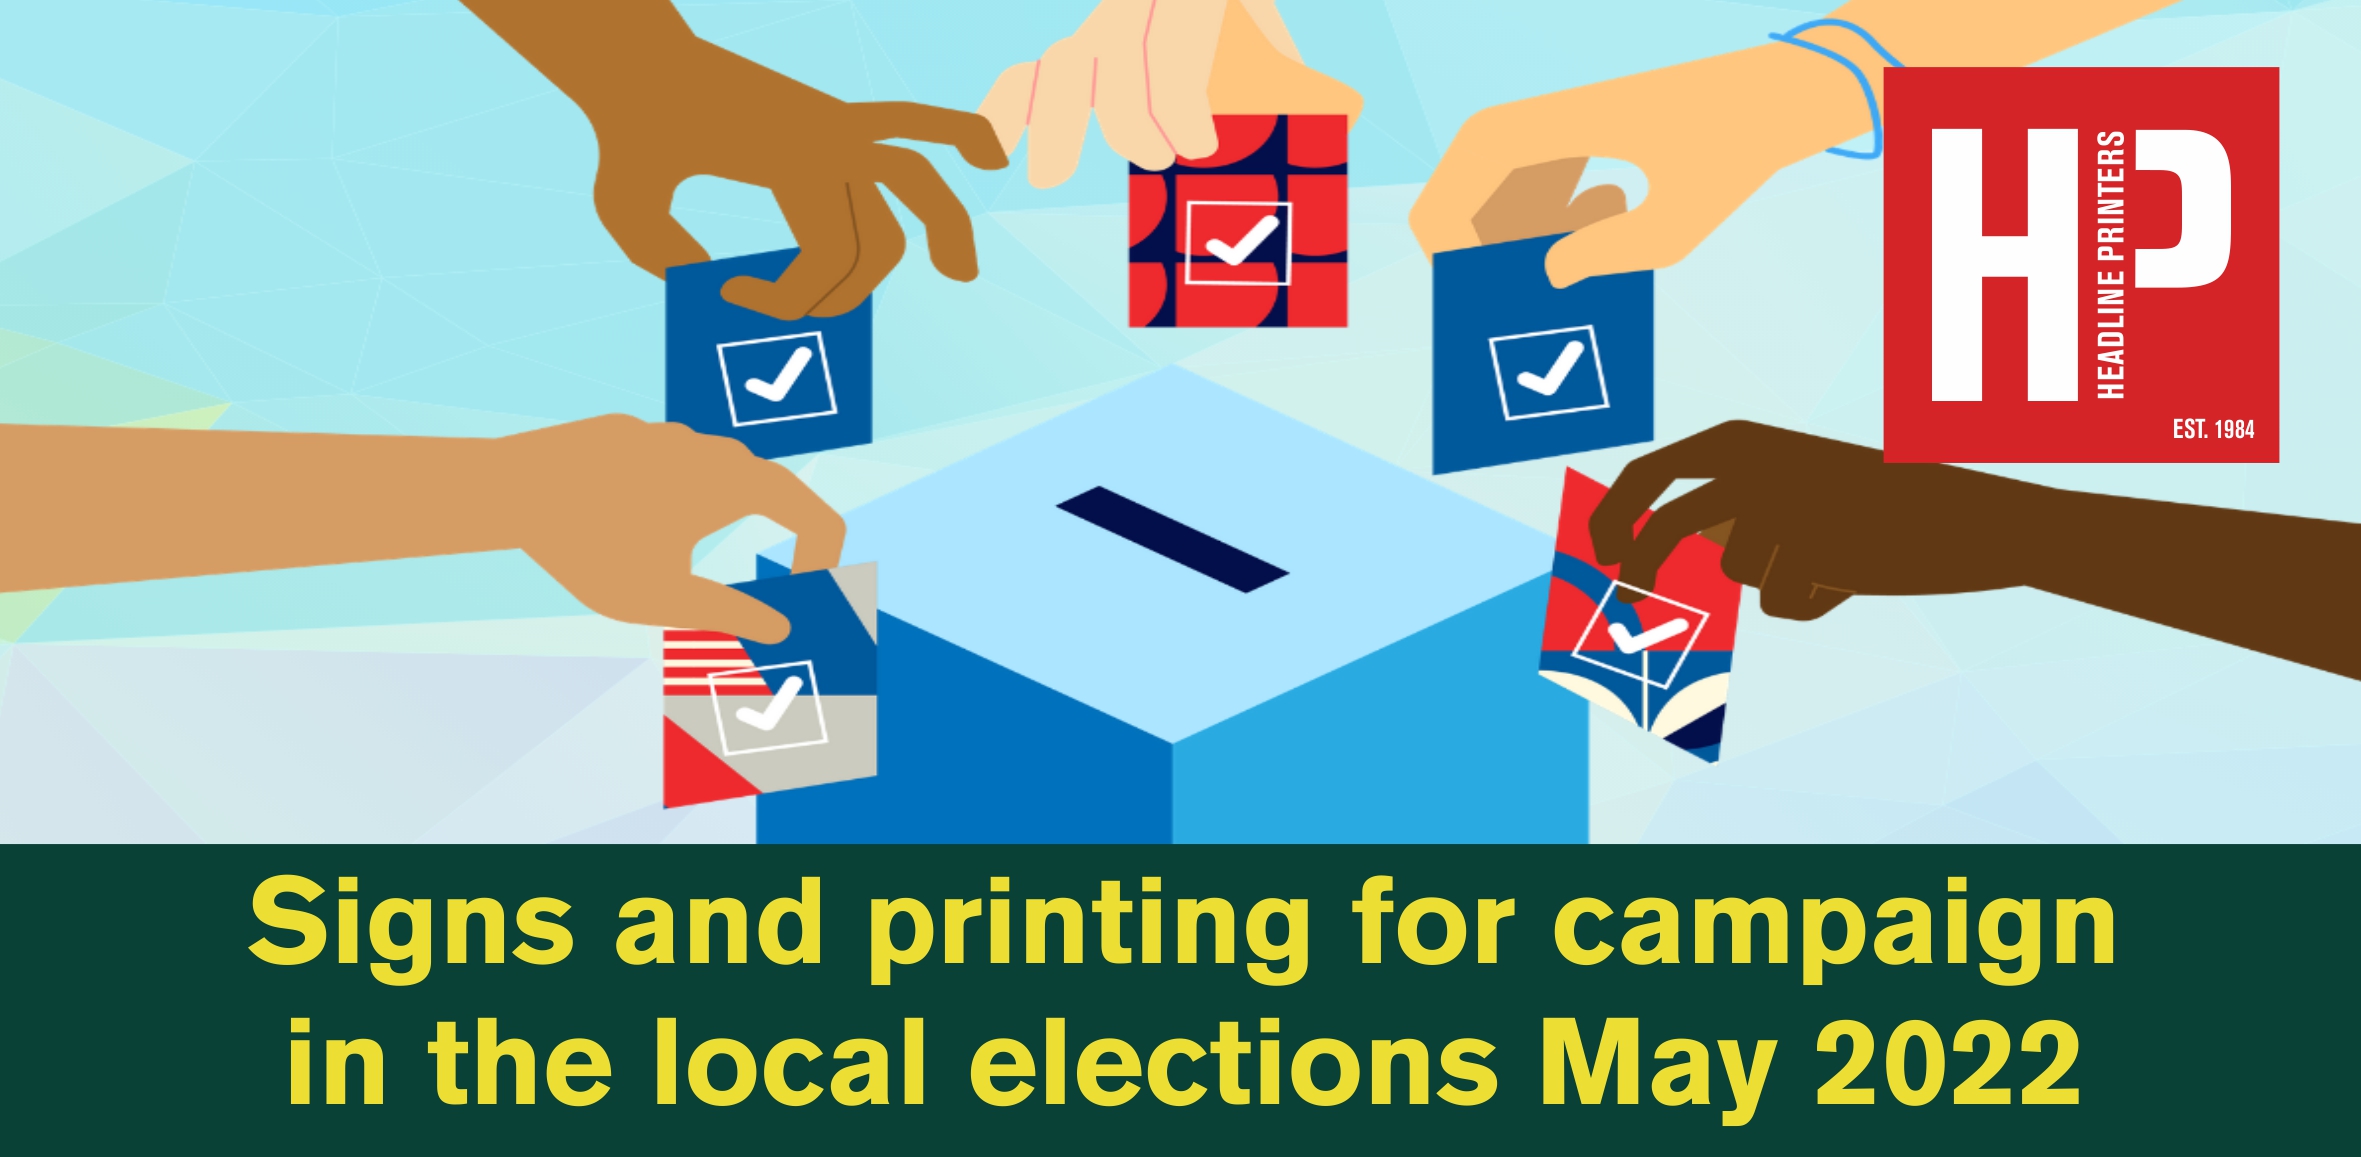 Signs and printing for campaign in the local elections May 2022